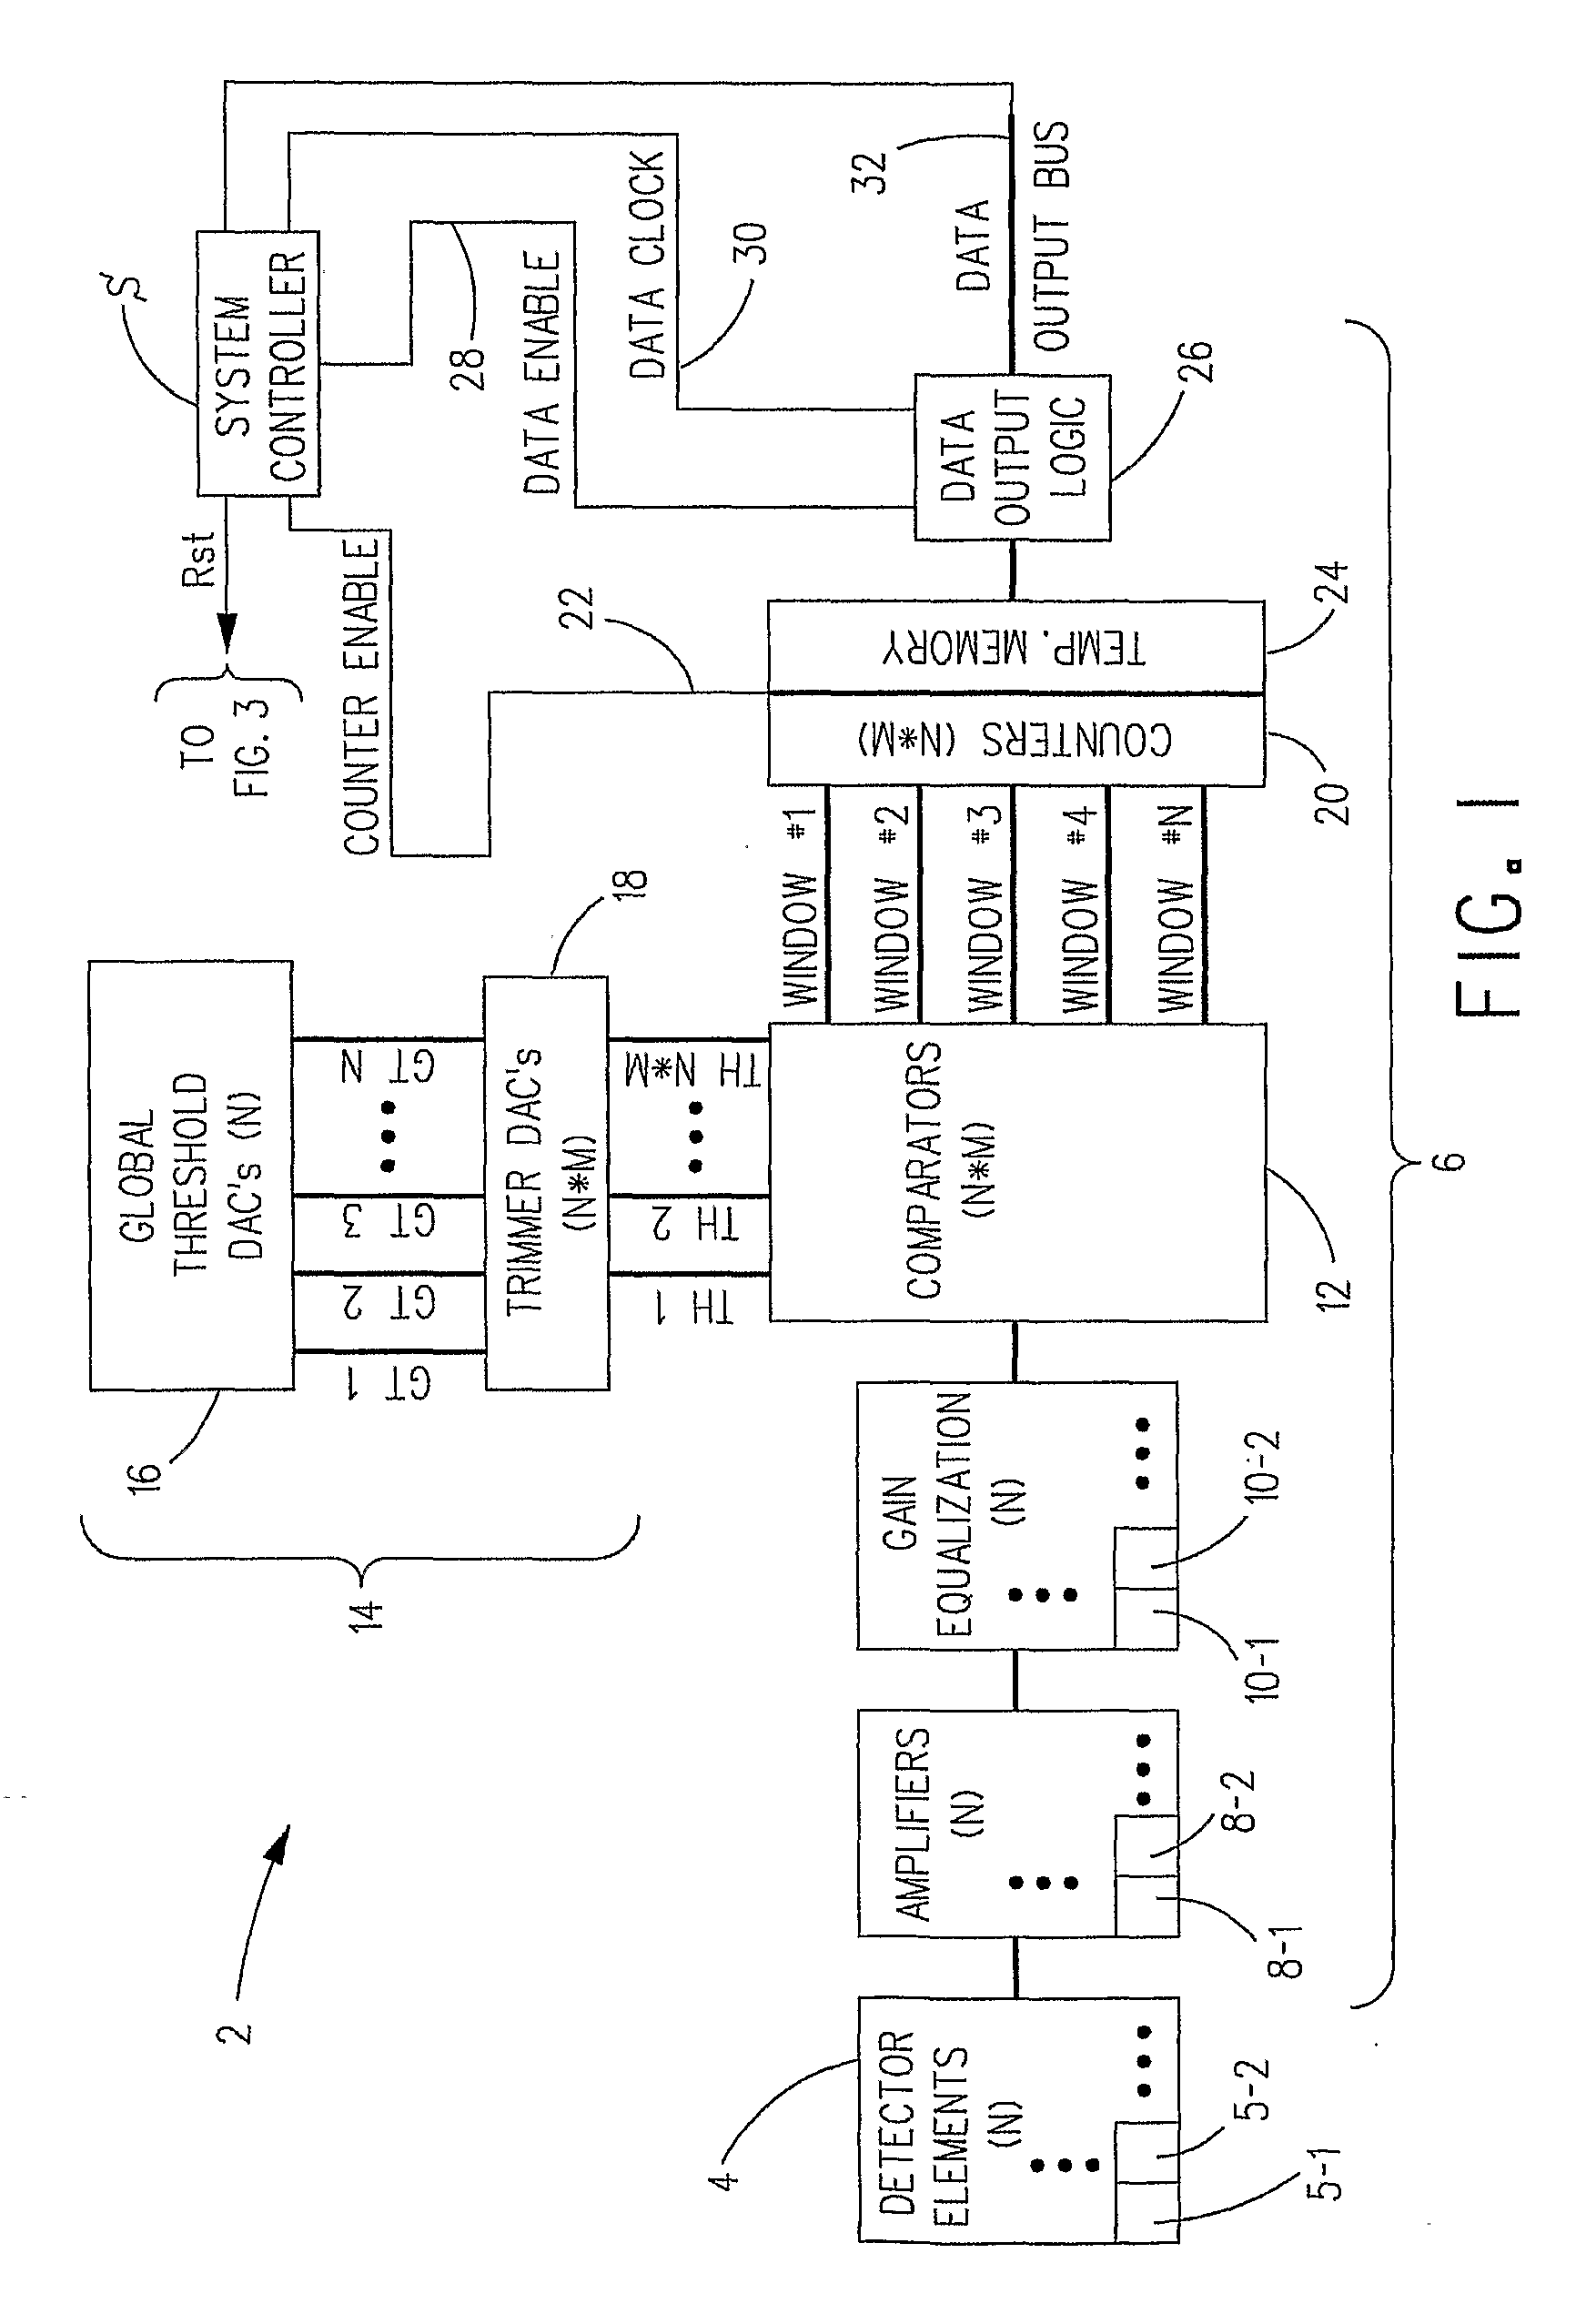 Multi-window signal processing electronics architecture for photon counting with multi-element sensors